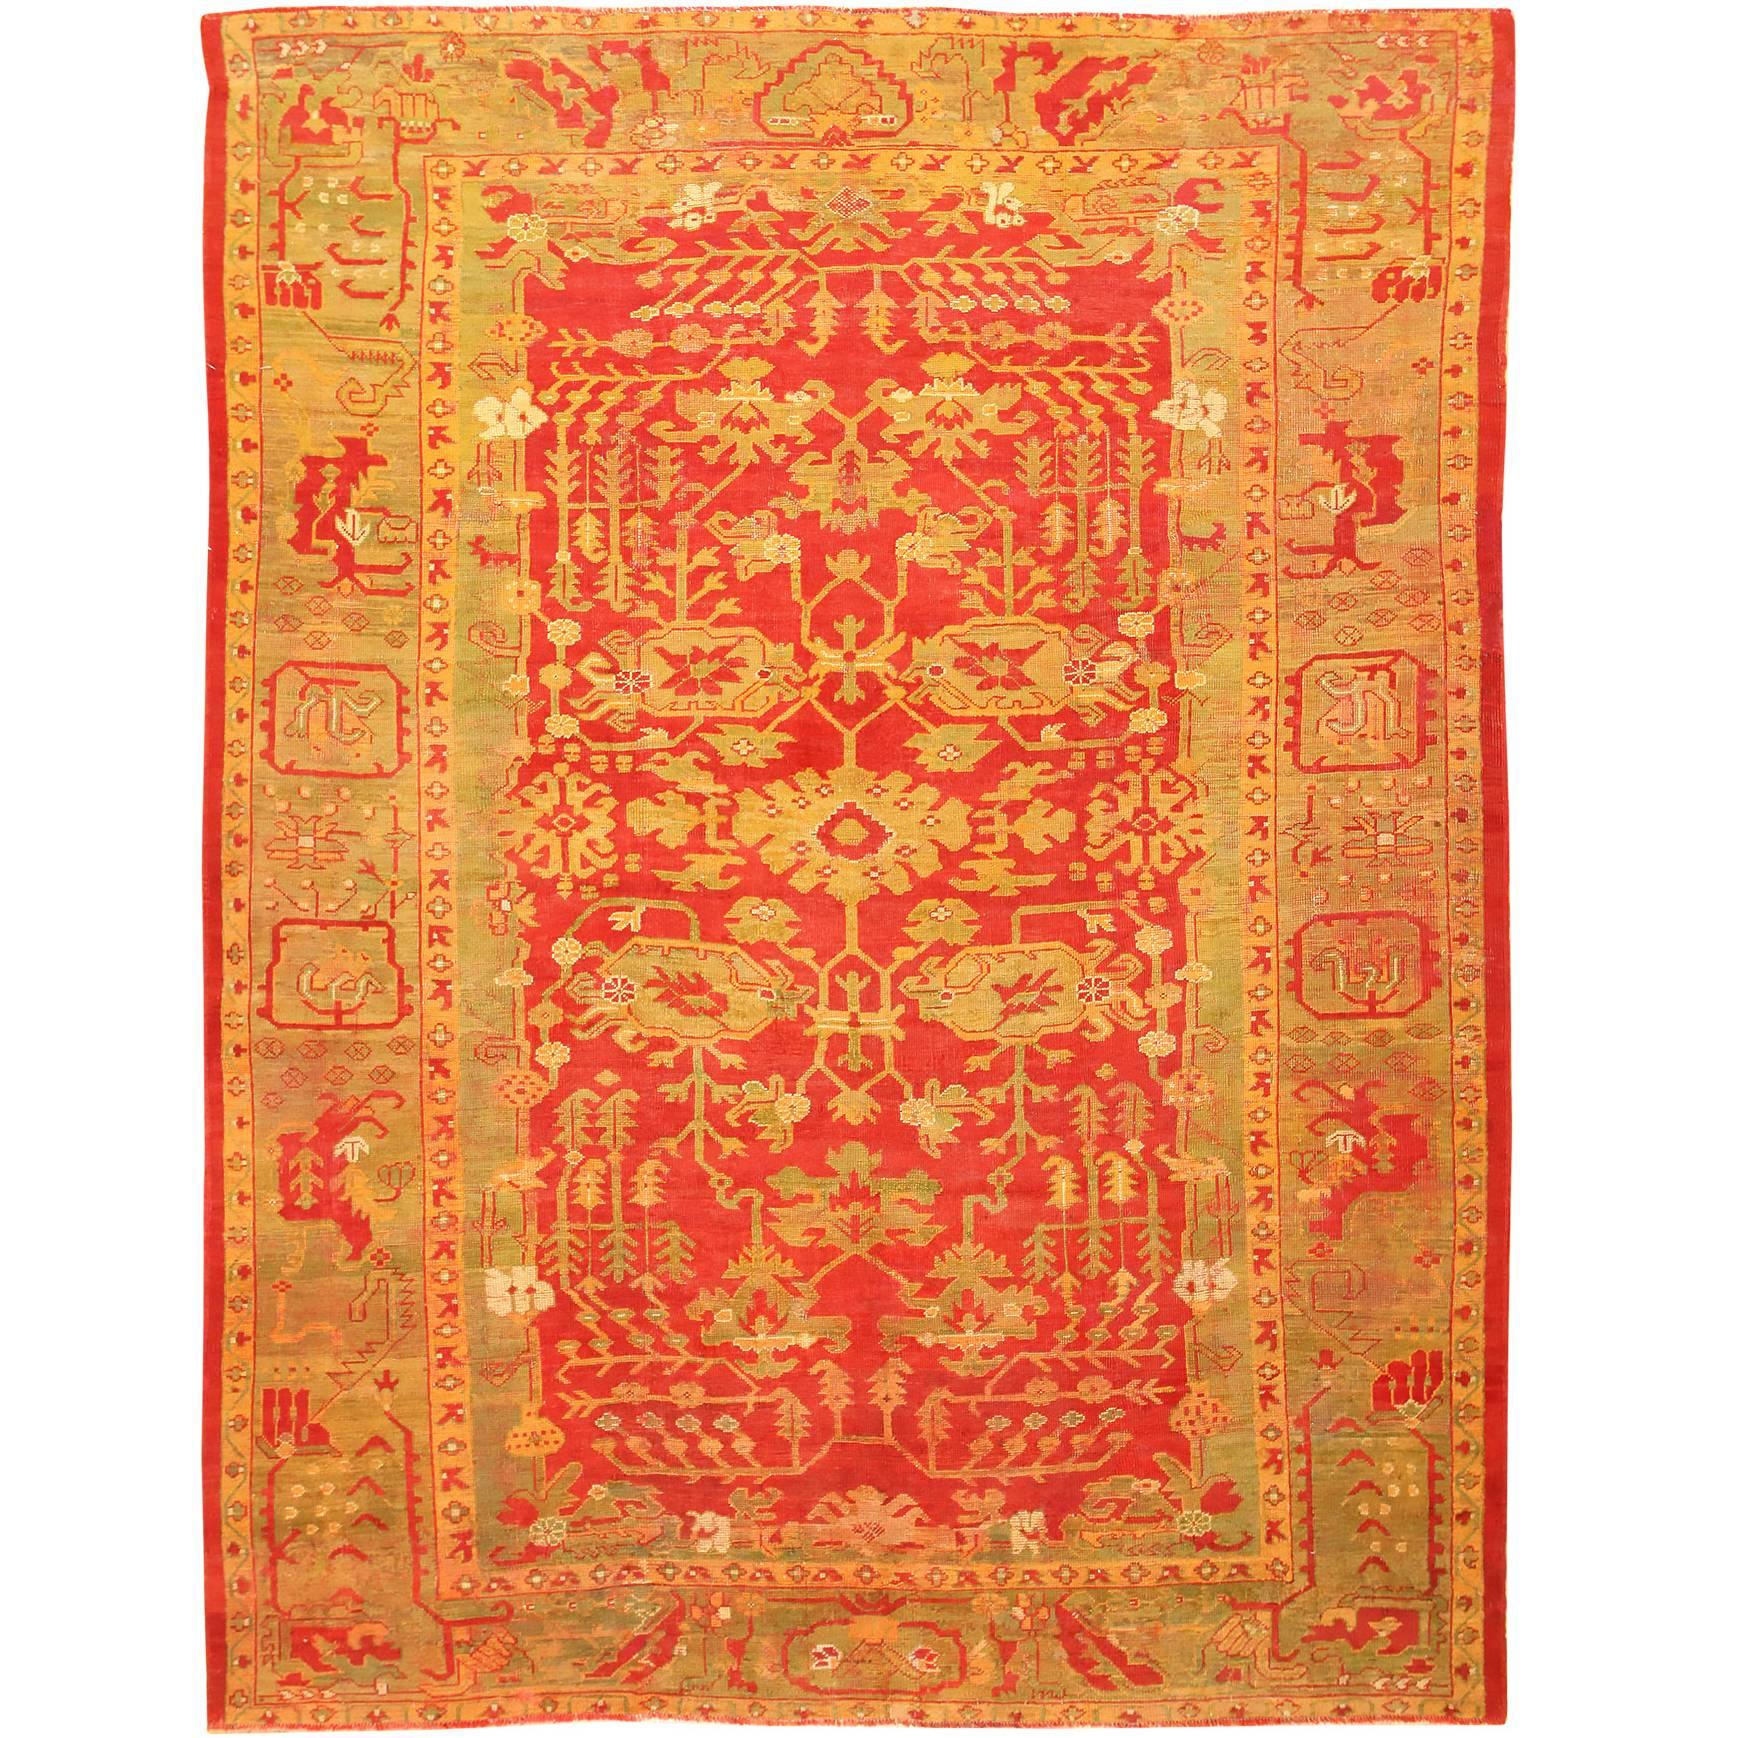 Beautiful Green and Red Antique Turkish Oushak Carpet